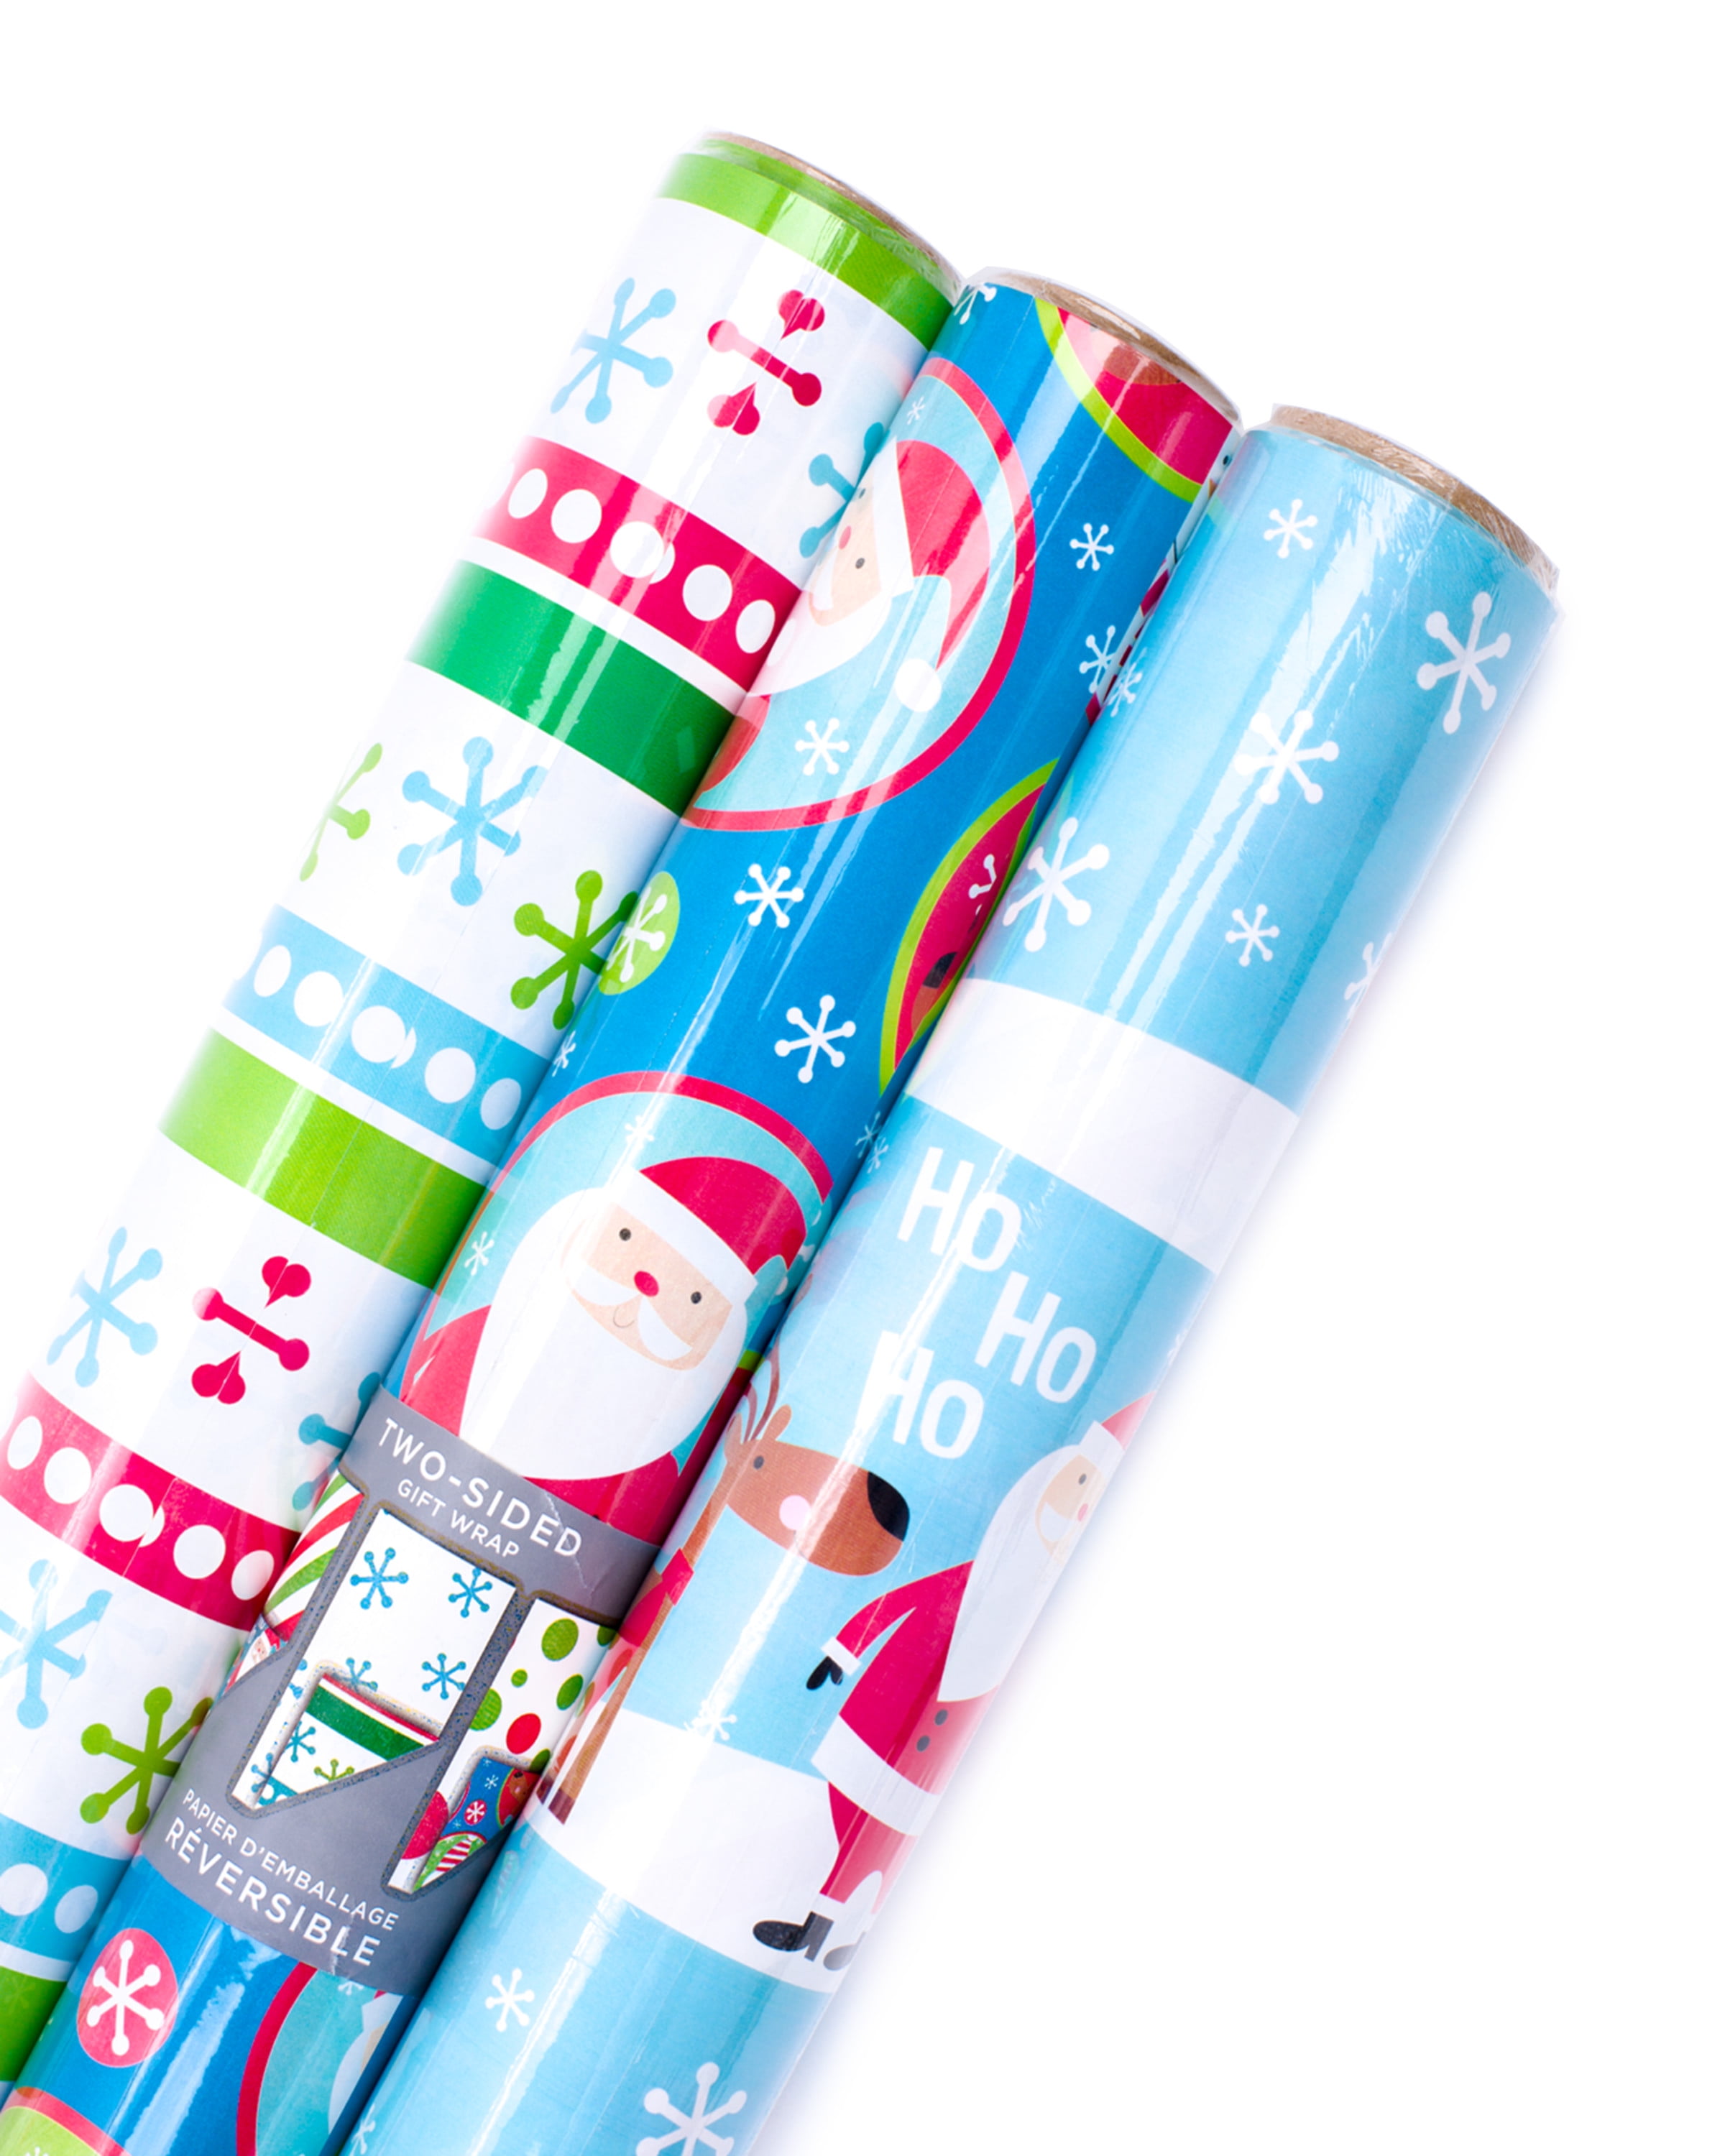 Hallmark Holiday Reversible Wrapping Paper Bundle, Rustic Christmas Pack of 3, 1